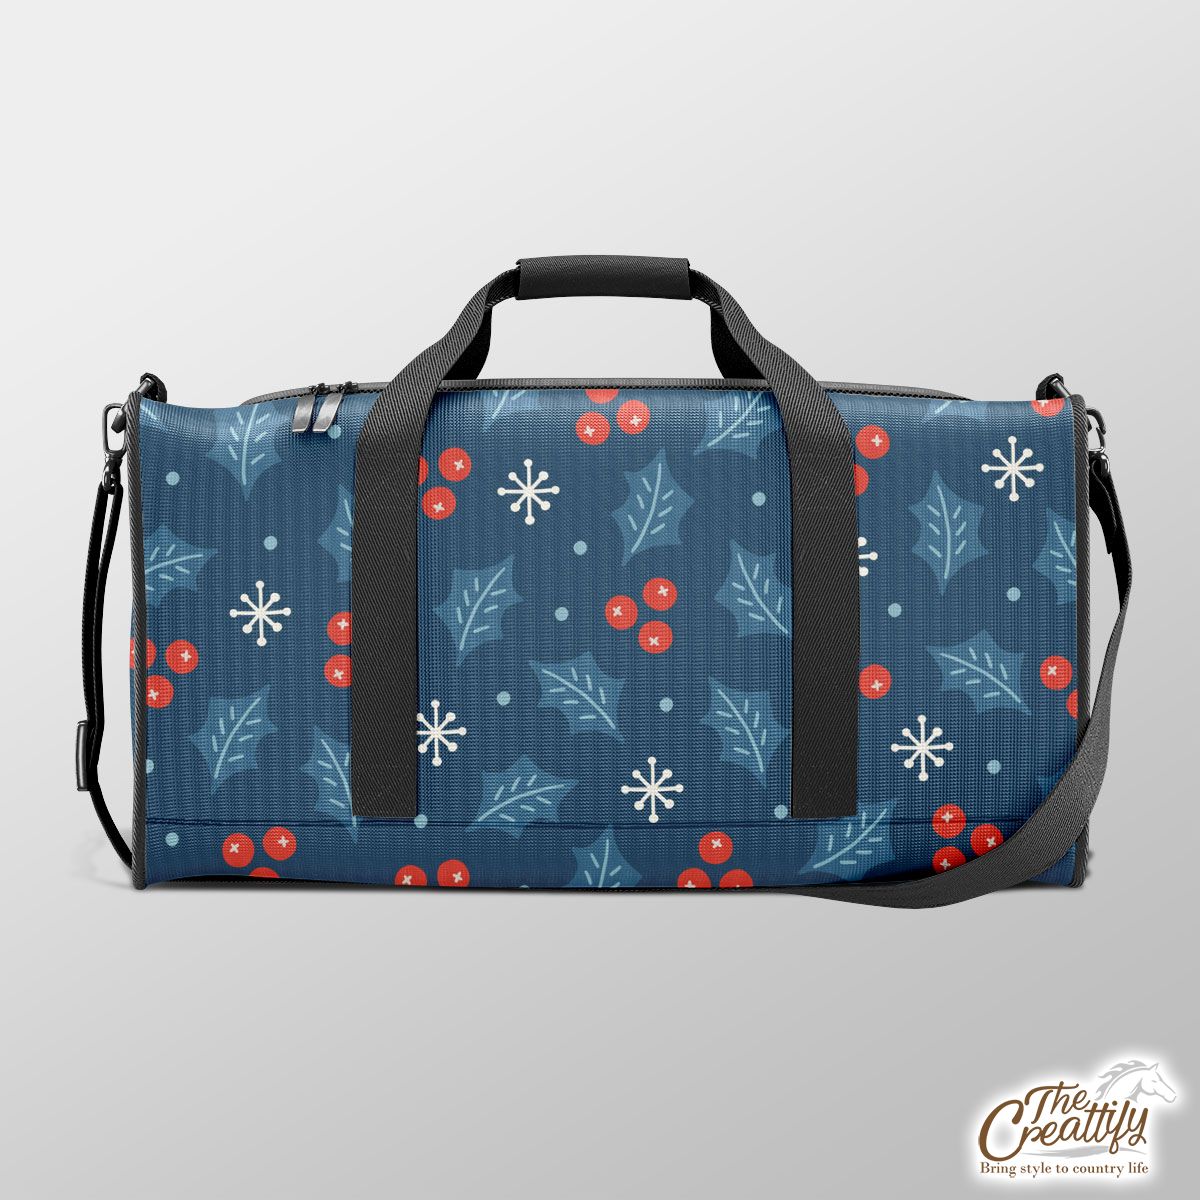 Snowflake And Holly Leaf Pattern Duffle Bag